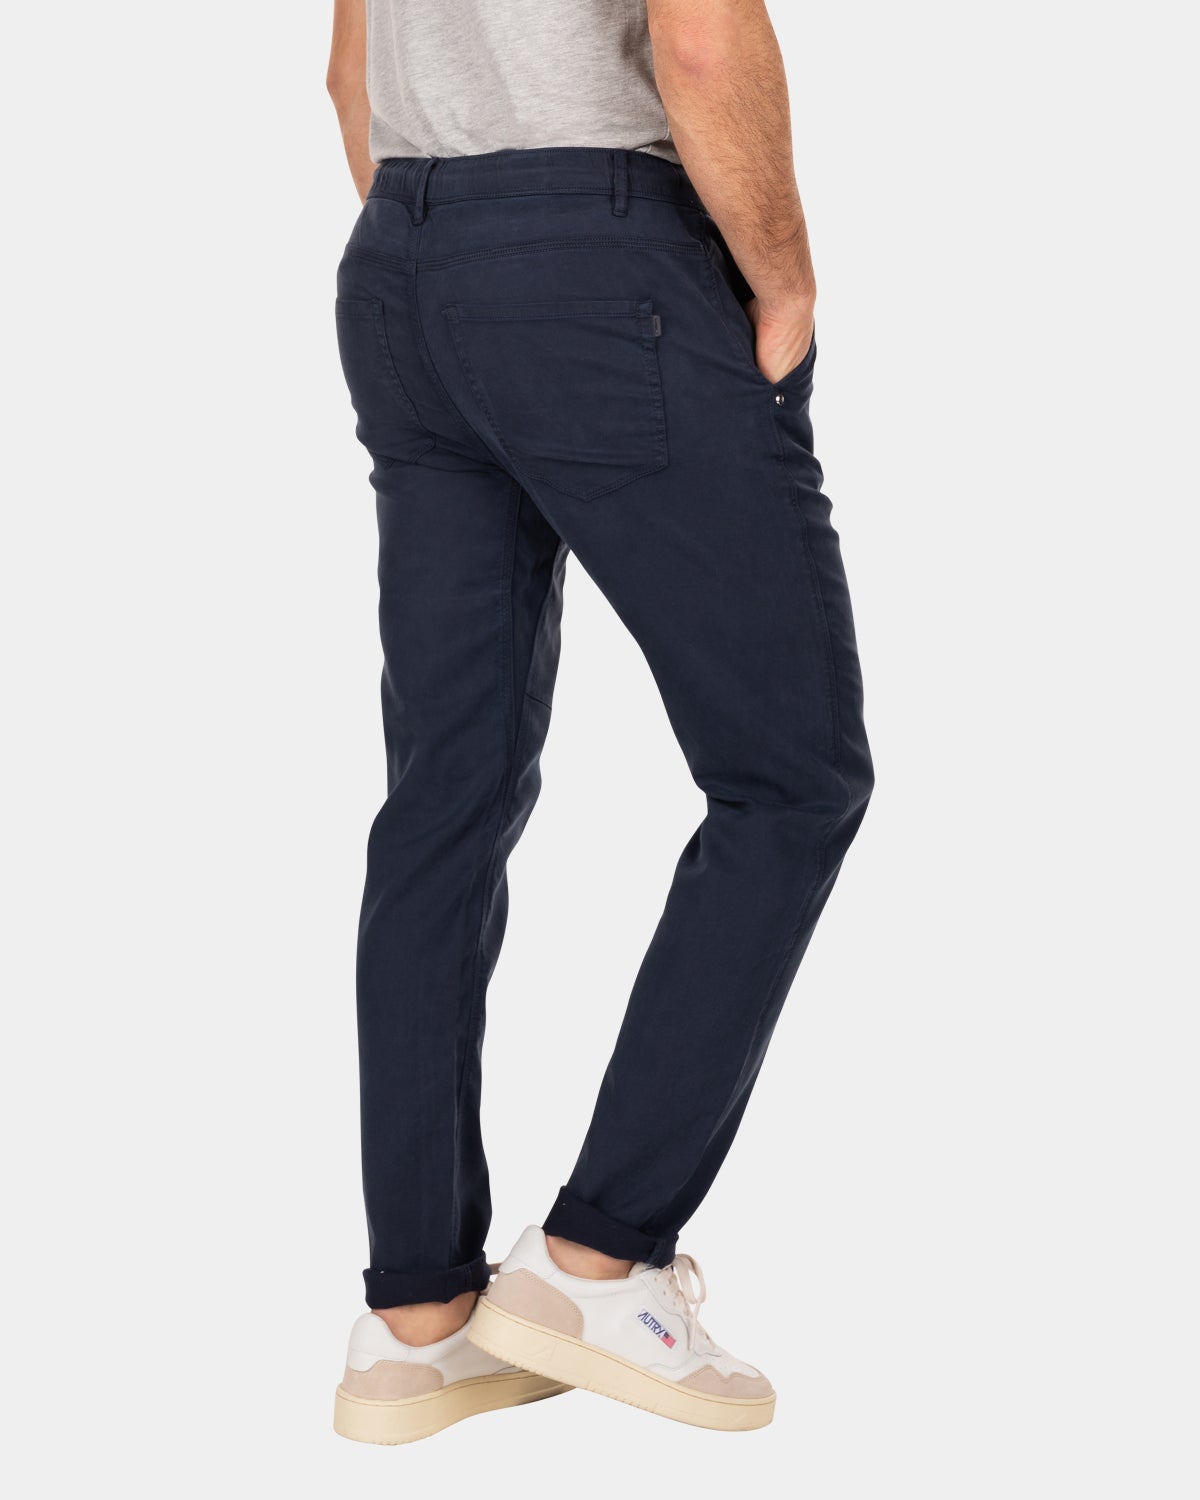 Sportive solid coloured chino - Traditional Navy